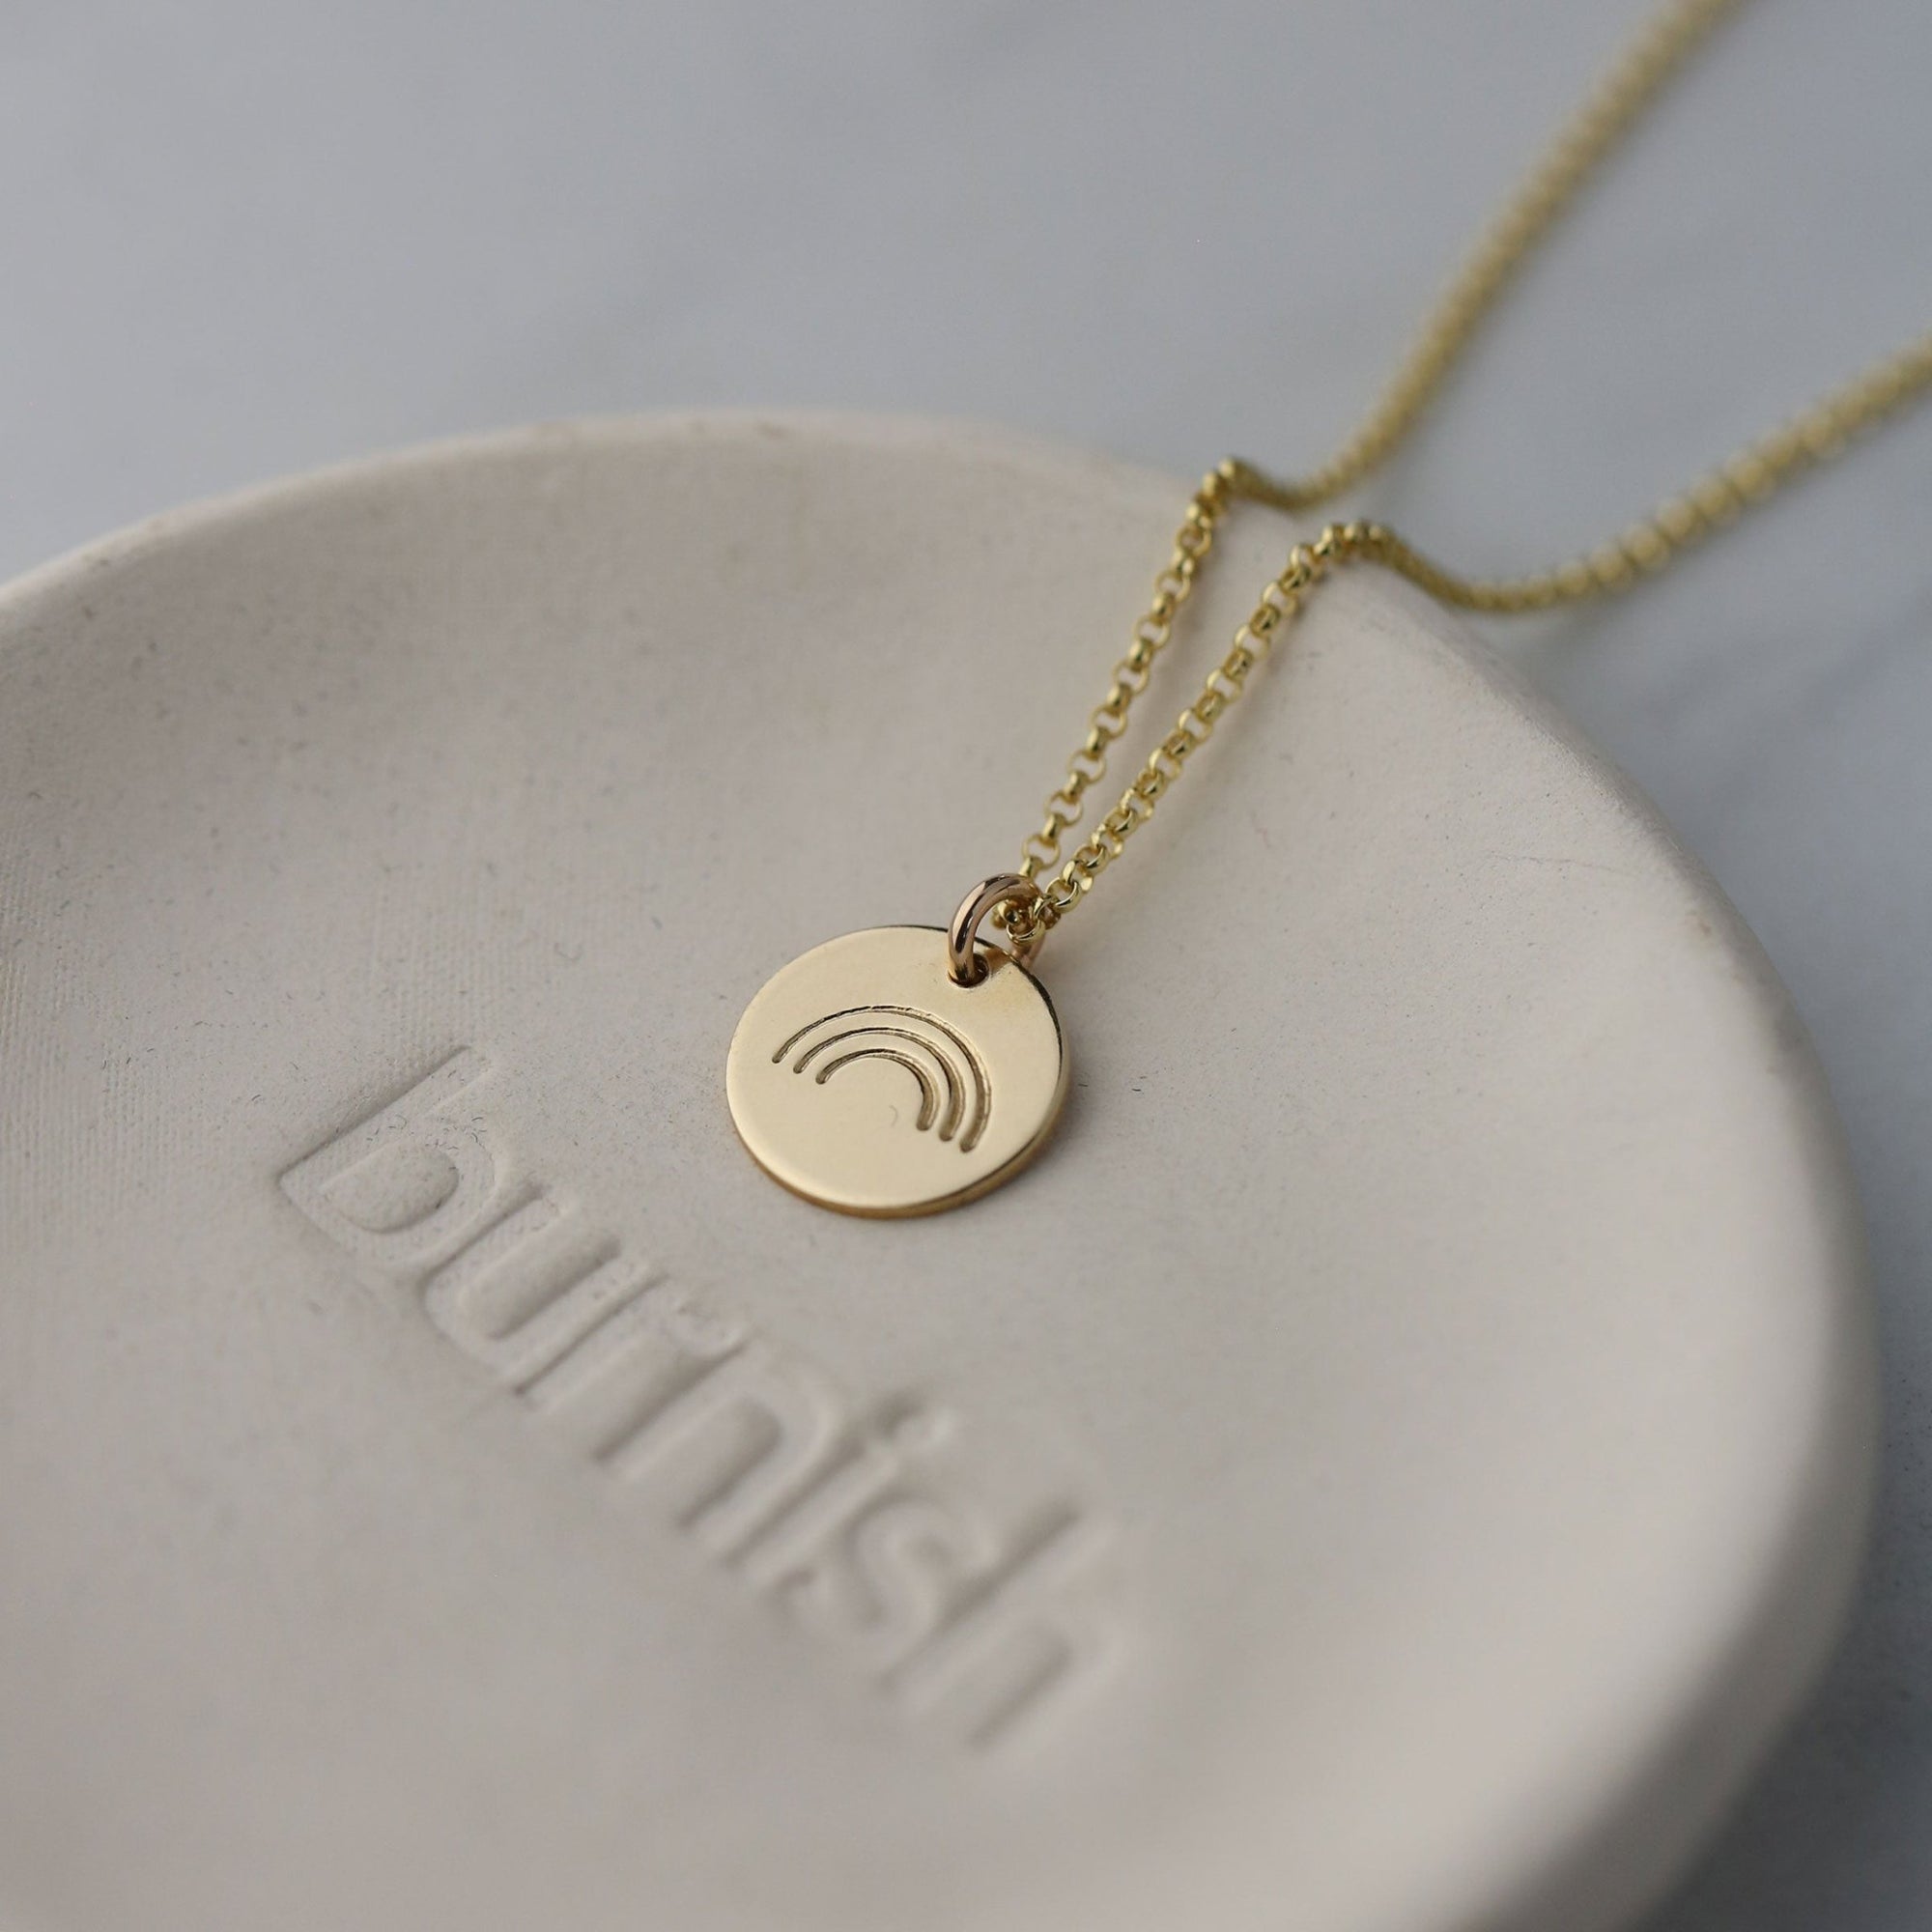 Hand Stamped Rainbow Necklace handmade by Burnish